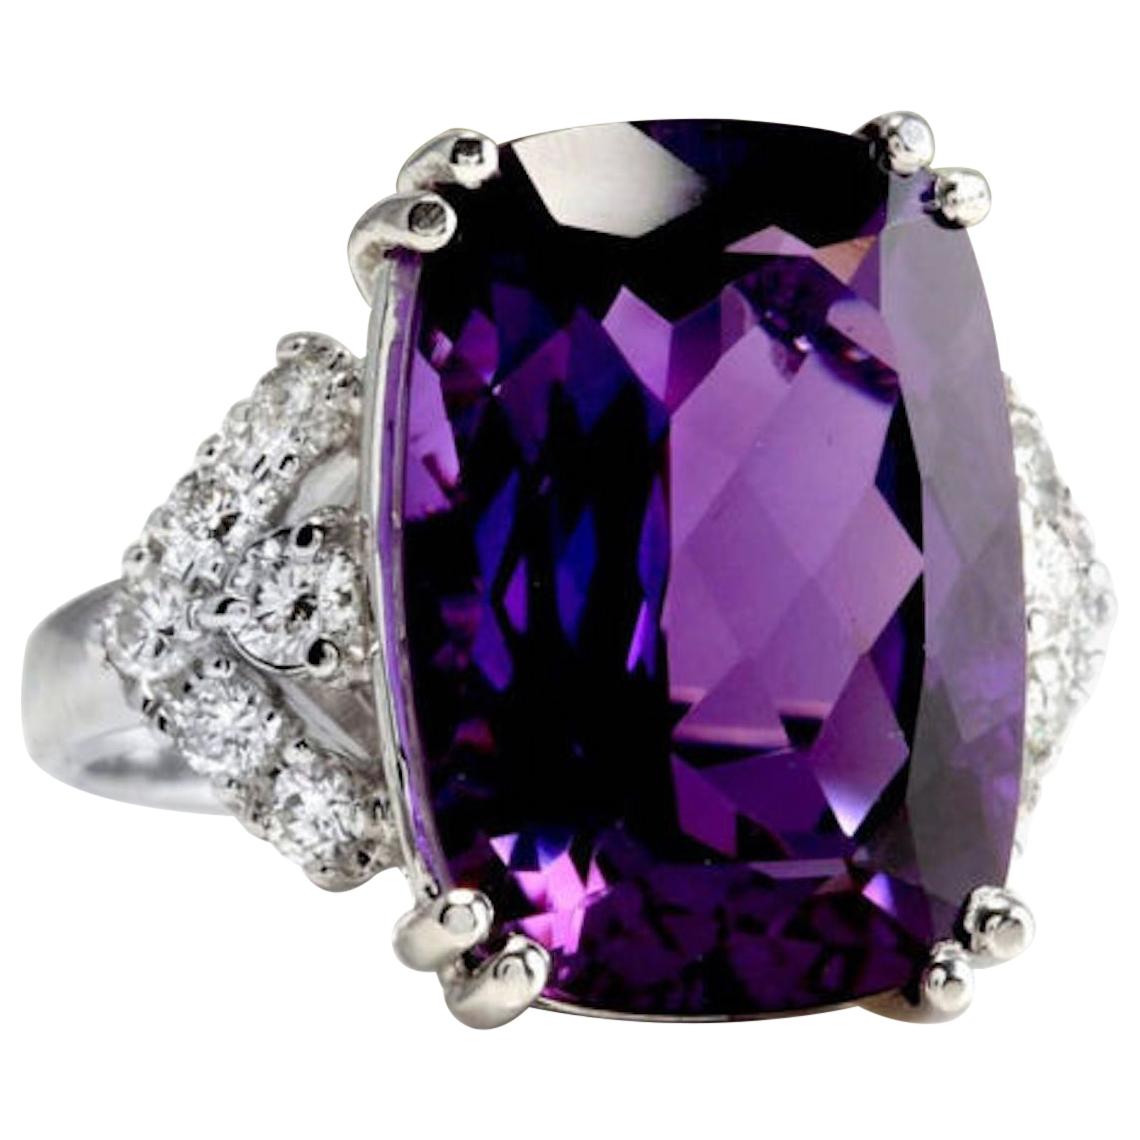 13.80 Carats Natural Amethyst and Diamond 14K Solid White Gold Ring

Total Natural Cushion Shaped Amethyst Weights: Approx. 13.20 Carats

Amethyst Measures: Approx. 18 x 13mm

Natural Round Diamonds Weight: Approx. 0.60 Carats (color G-H / Clarity